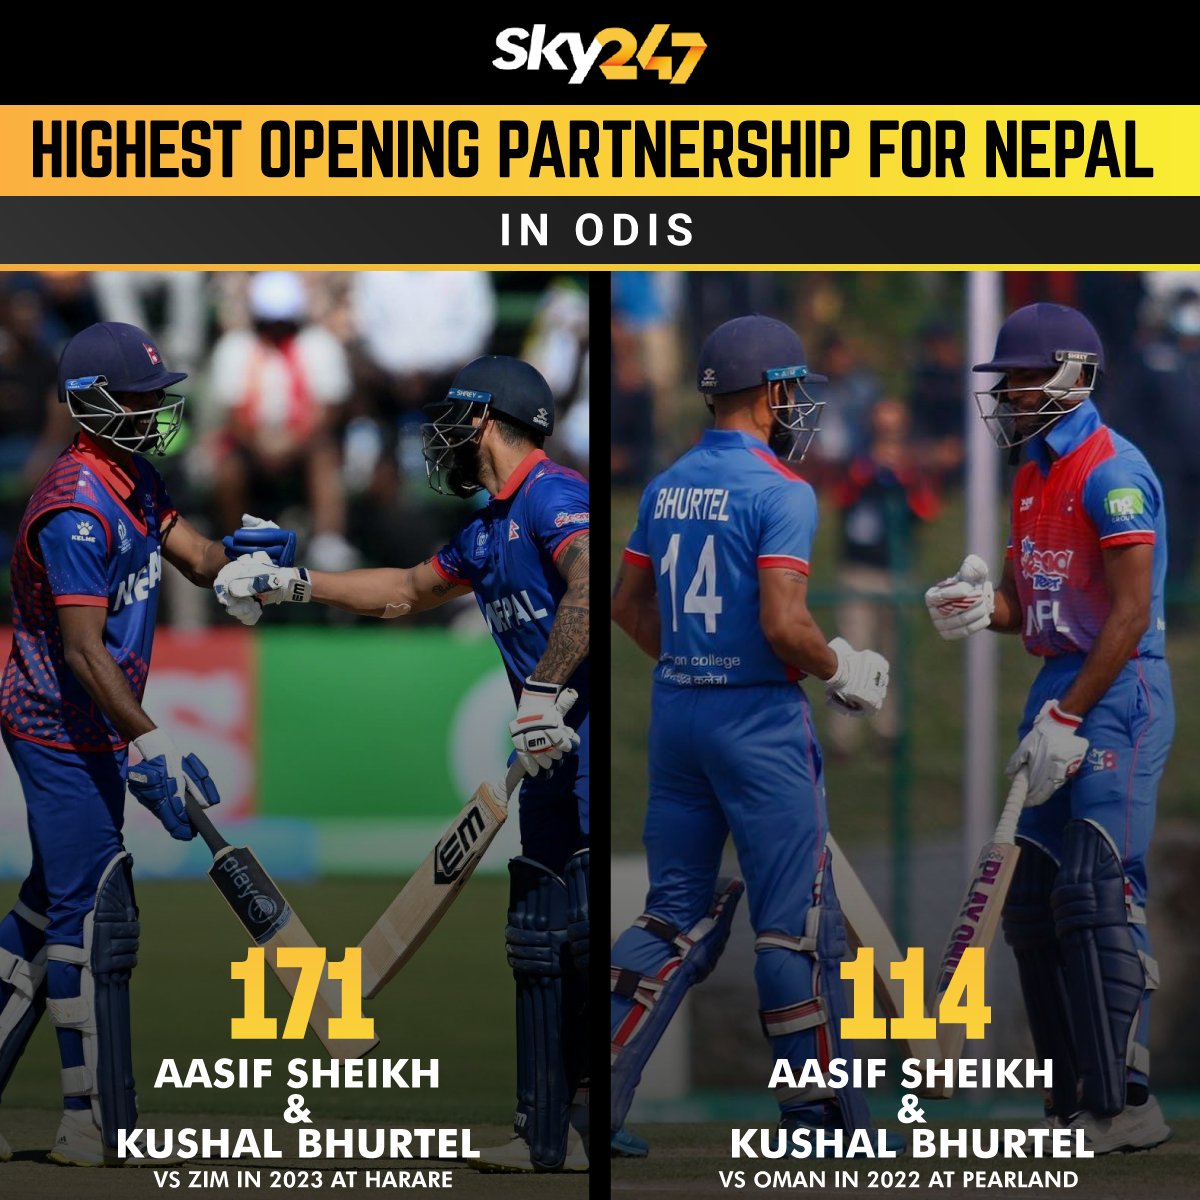 Aasif Sheikh and Kudhal Bhurtel registered the highest-ever opening partnership for Nepal in the World Cup qualifier match against Zimbabwe.

#AasifSheikh #KushalBhurtel #Cricket #Nepal #WCQualifiers #WorldCup #ODI #ZIMvsNEP #SKY247